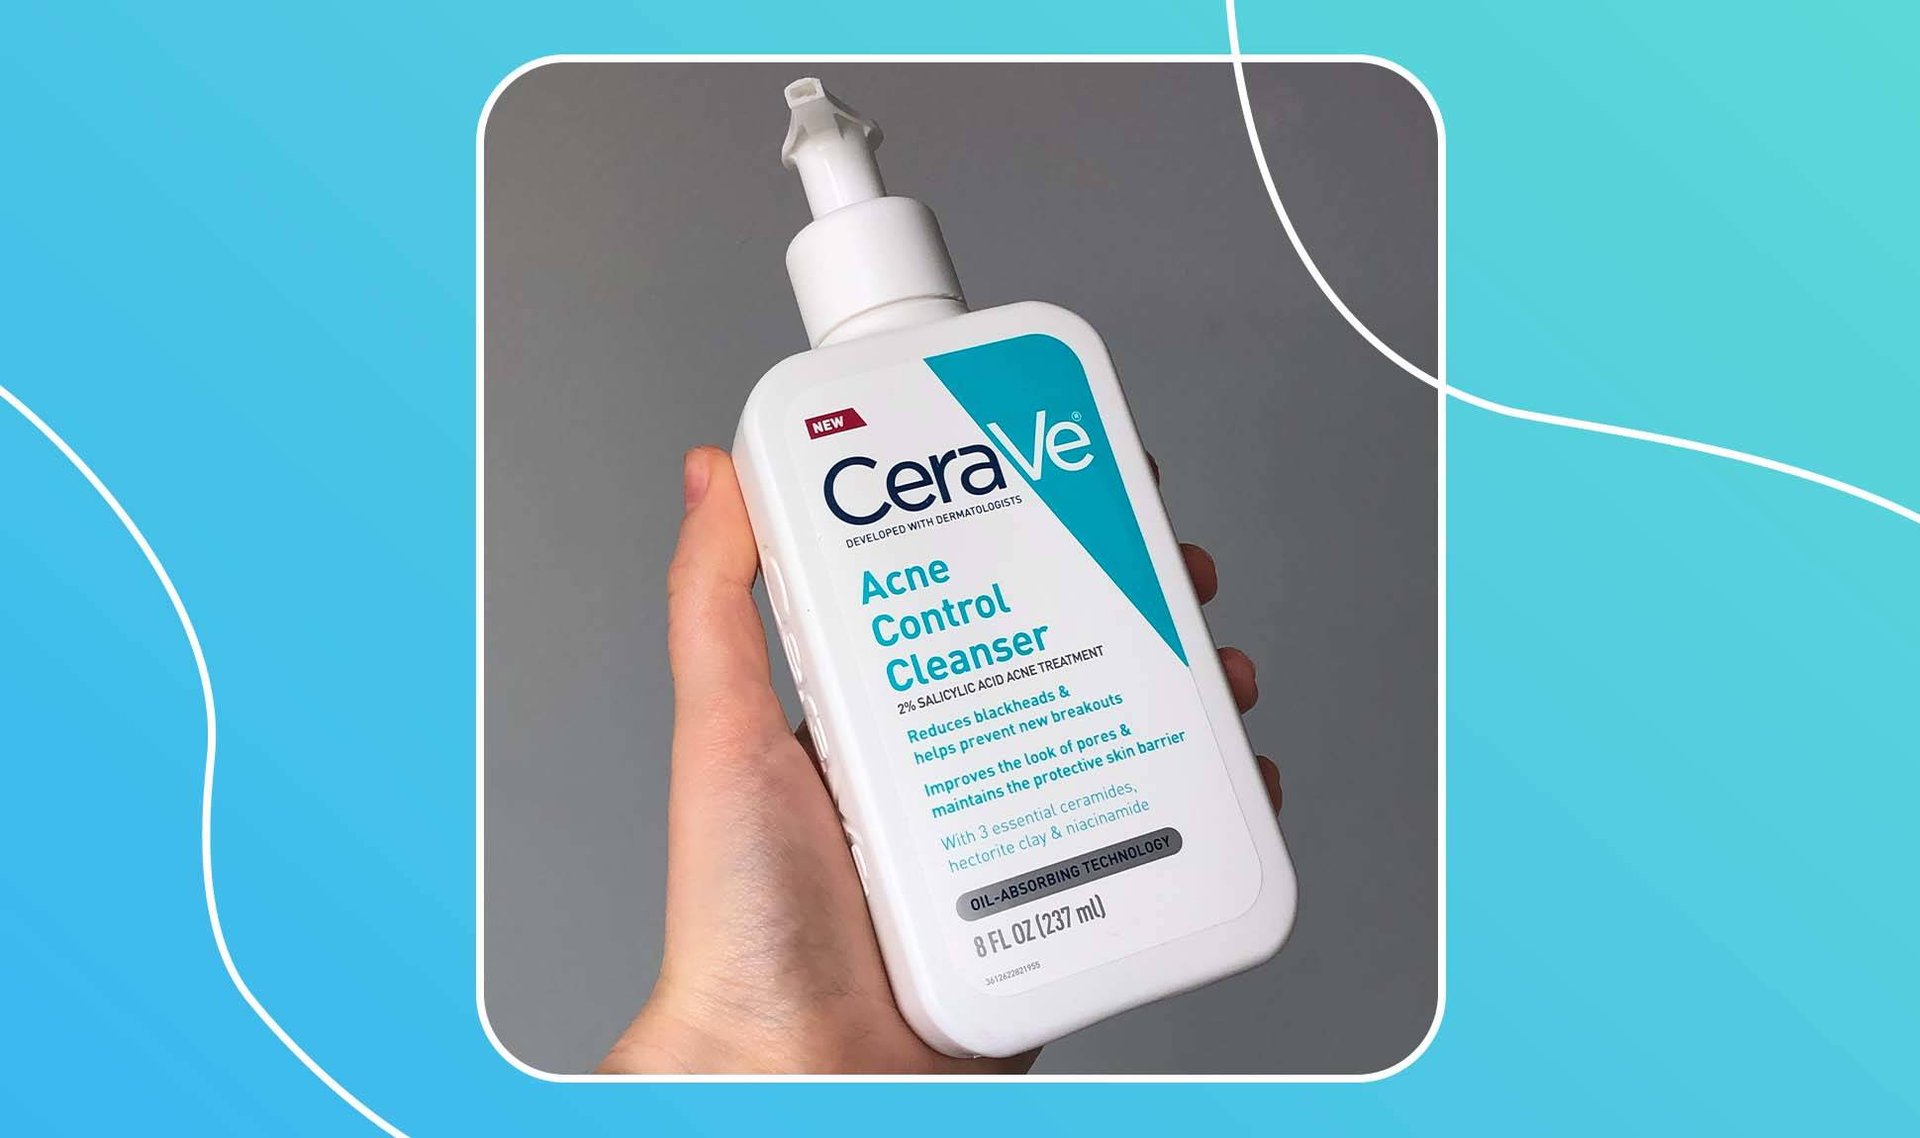 A Thank You Note to CeraVe Acne Control Cleanser